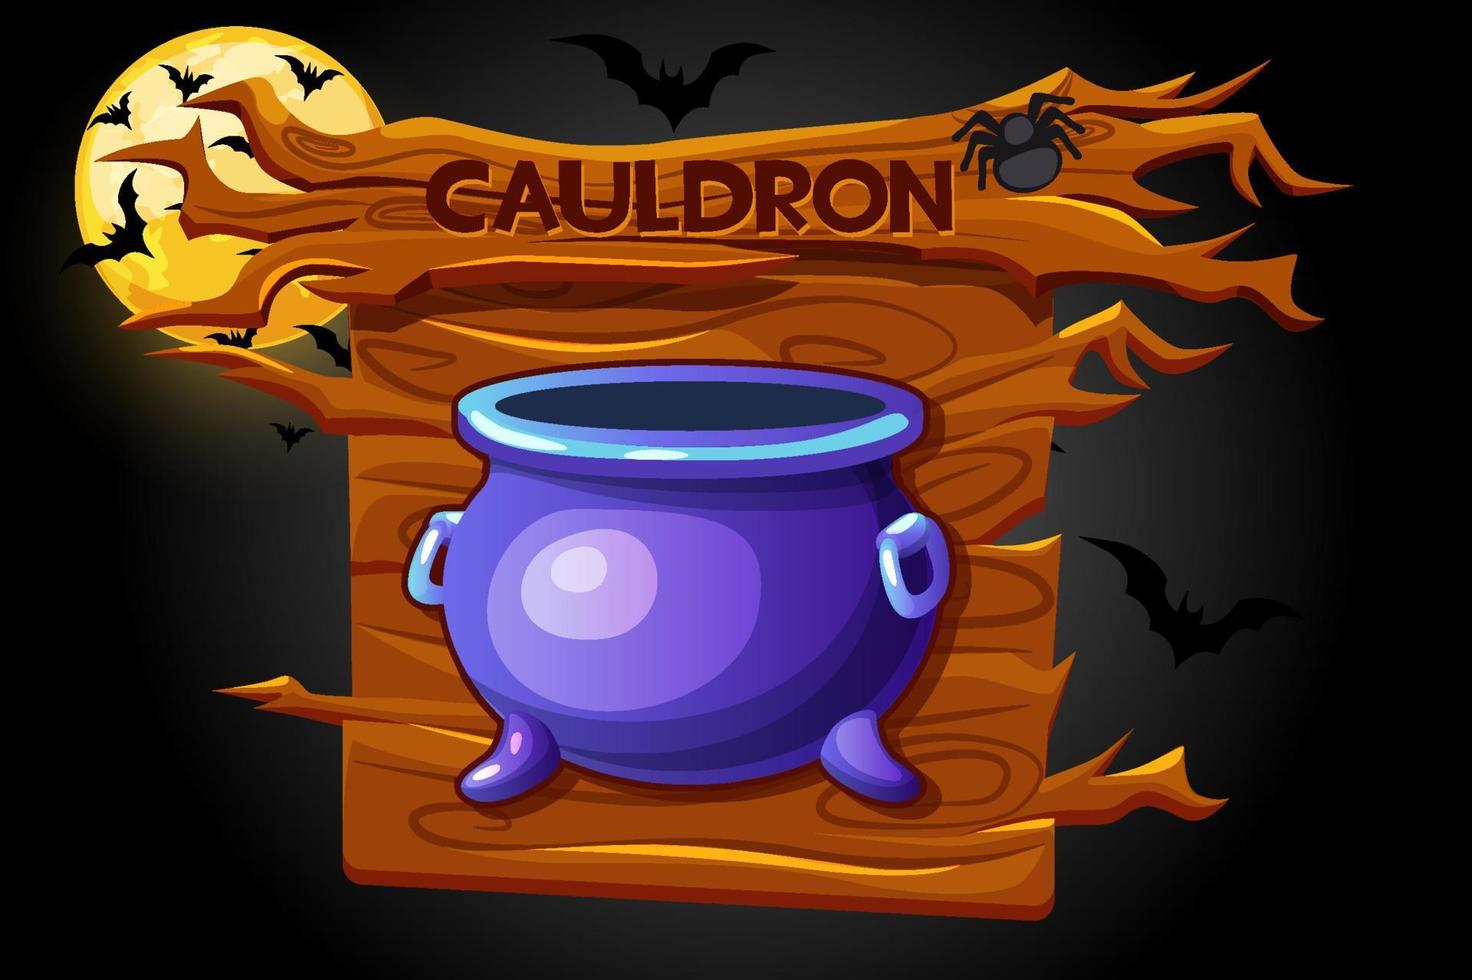 Cauldron game icon, halloween wooden banner and scary night. Vector illustration of board and moon with bats.